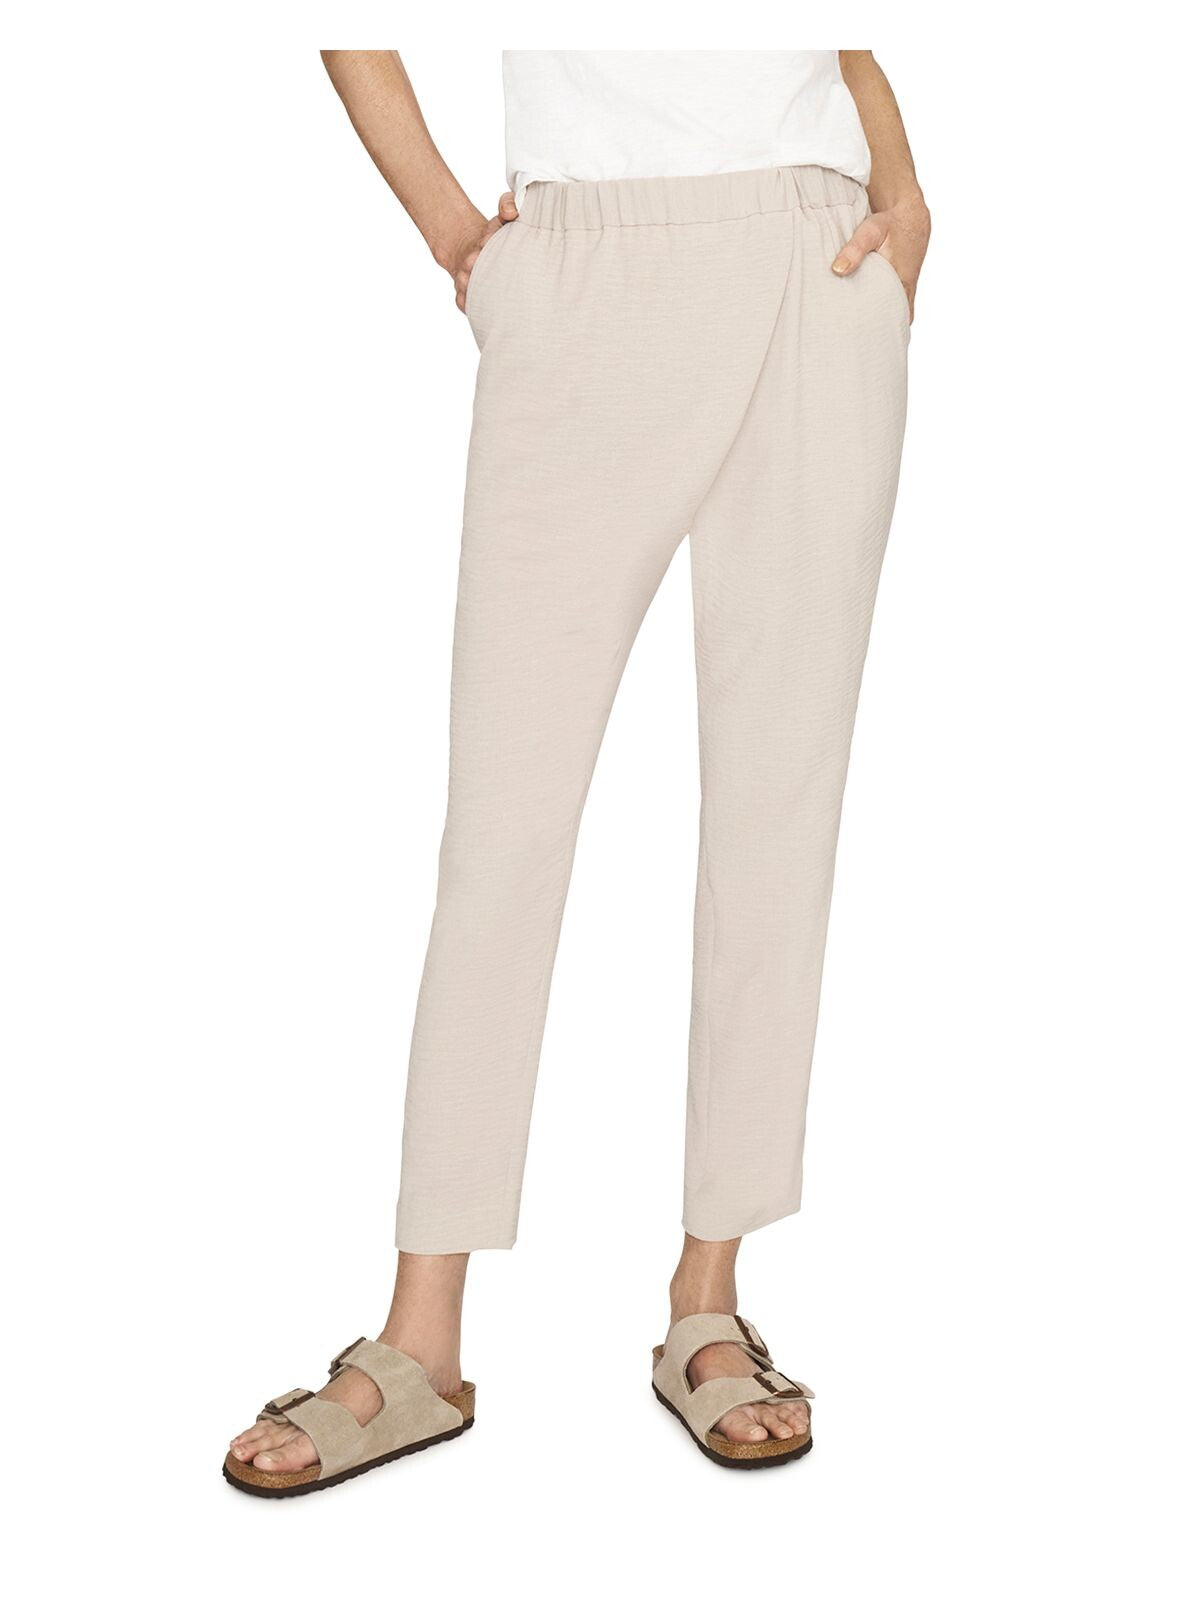 B NEW YORK Womens Beige Textured Pocketed Pull On Style Ankle Length Wear To Work Pants M